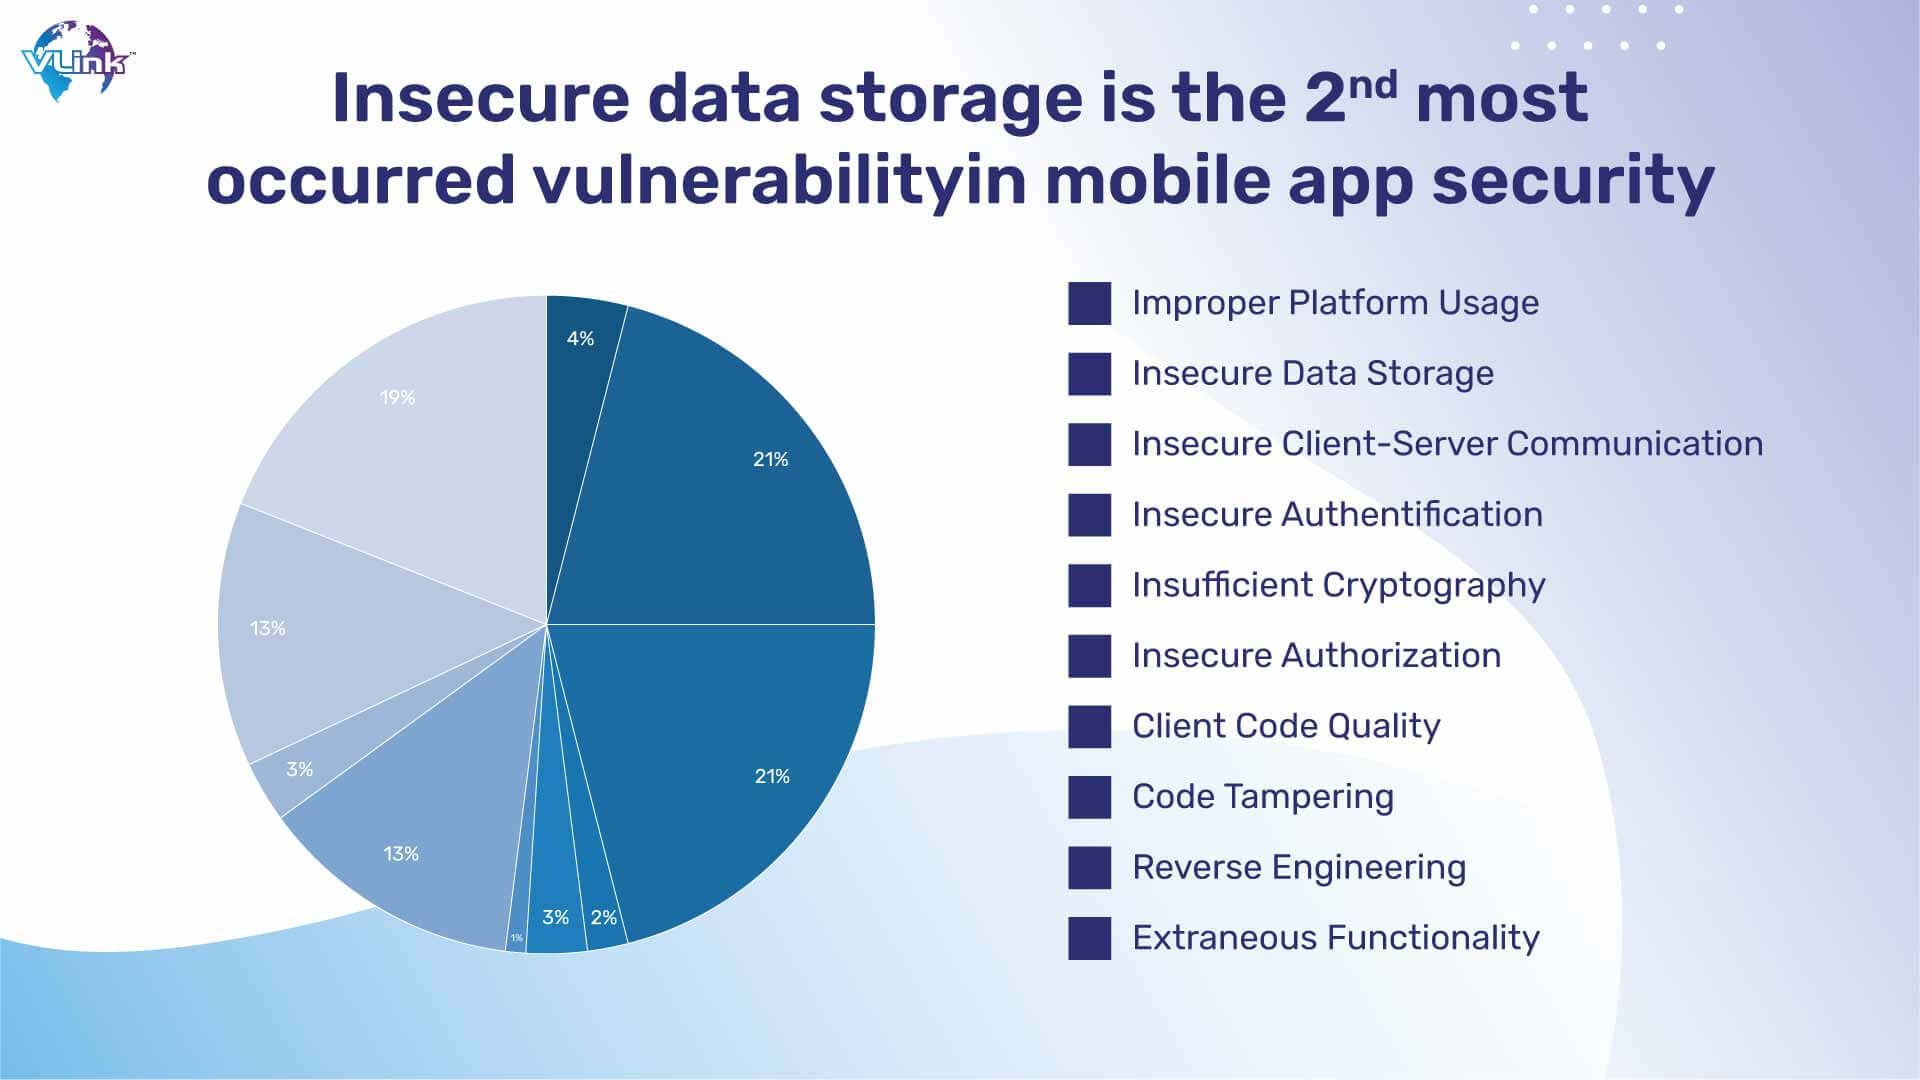 Insecure data storage is the 2nd most occurred vulnerability in mobile app security